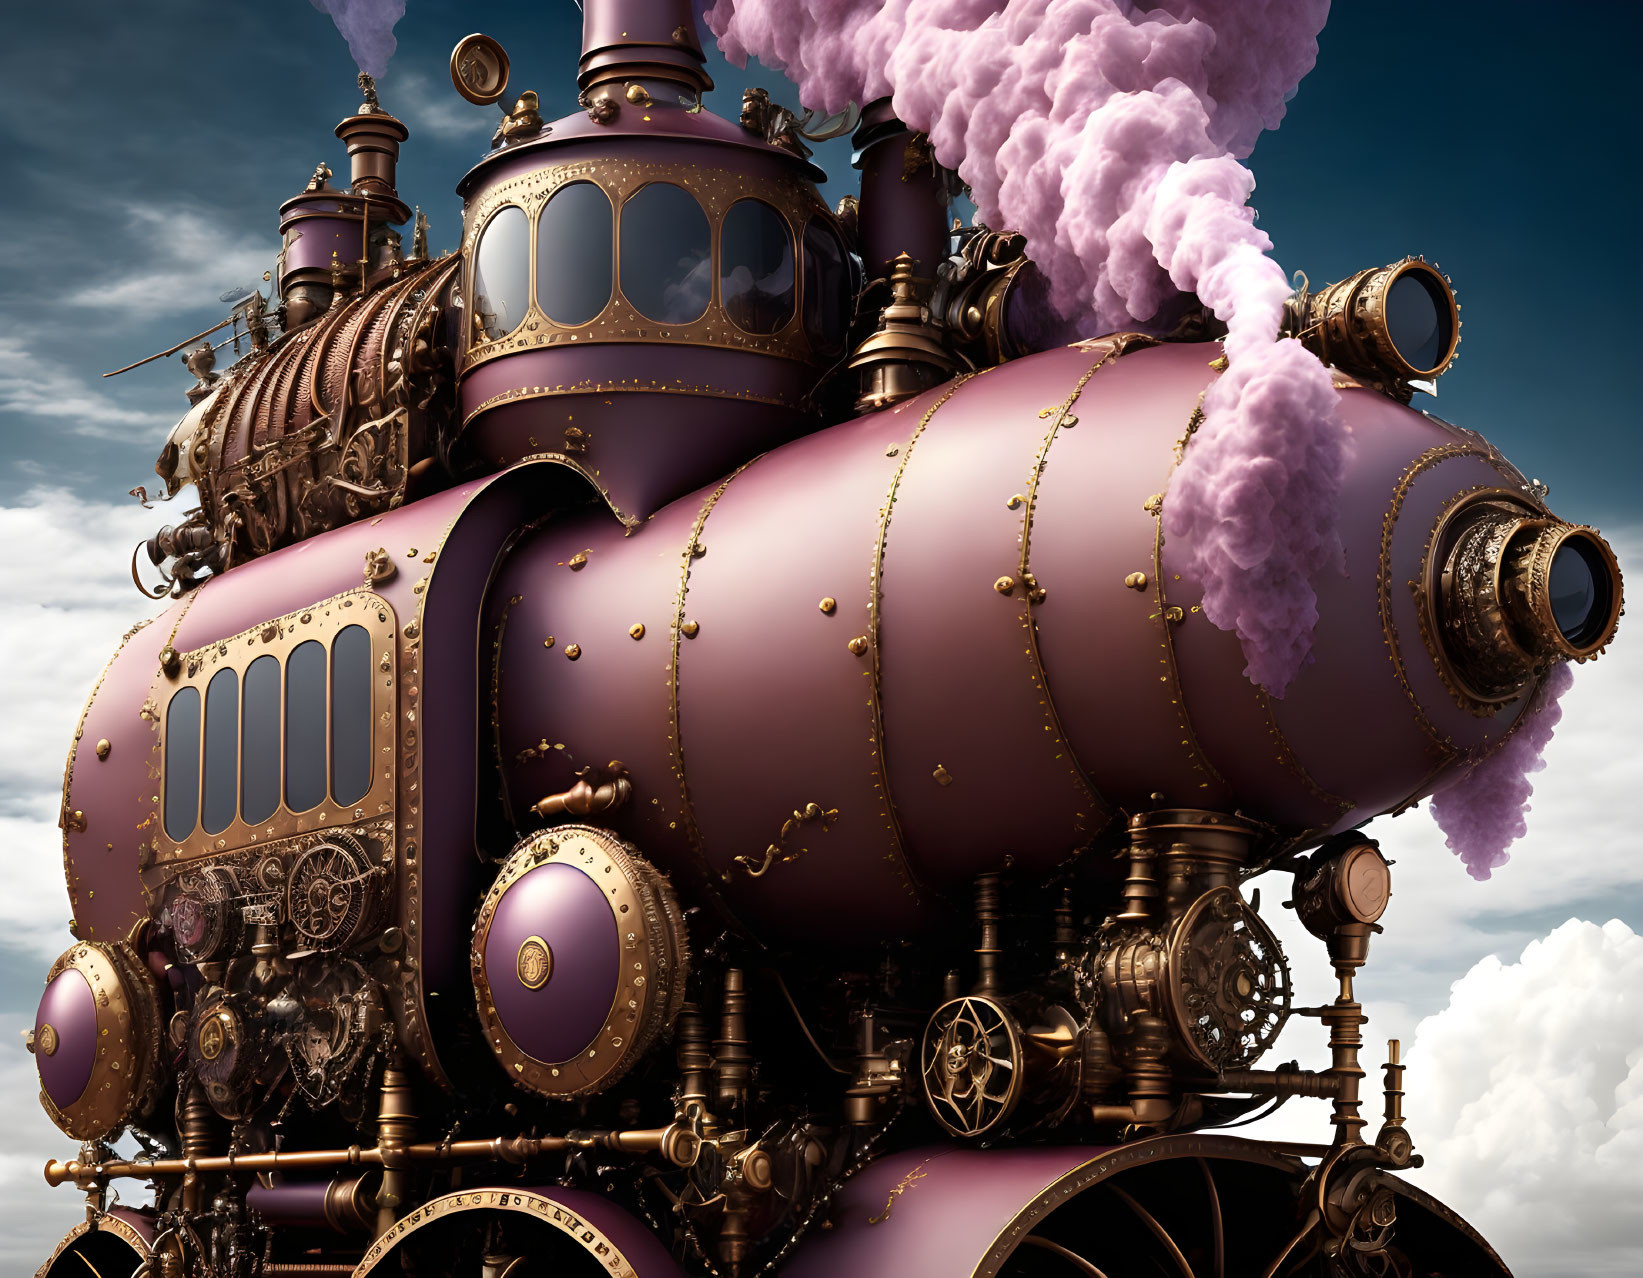 Steampunk-style locomotive emitting pink steam on cloudy sky background